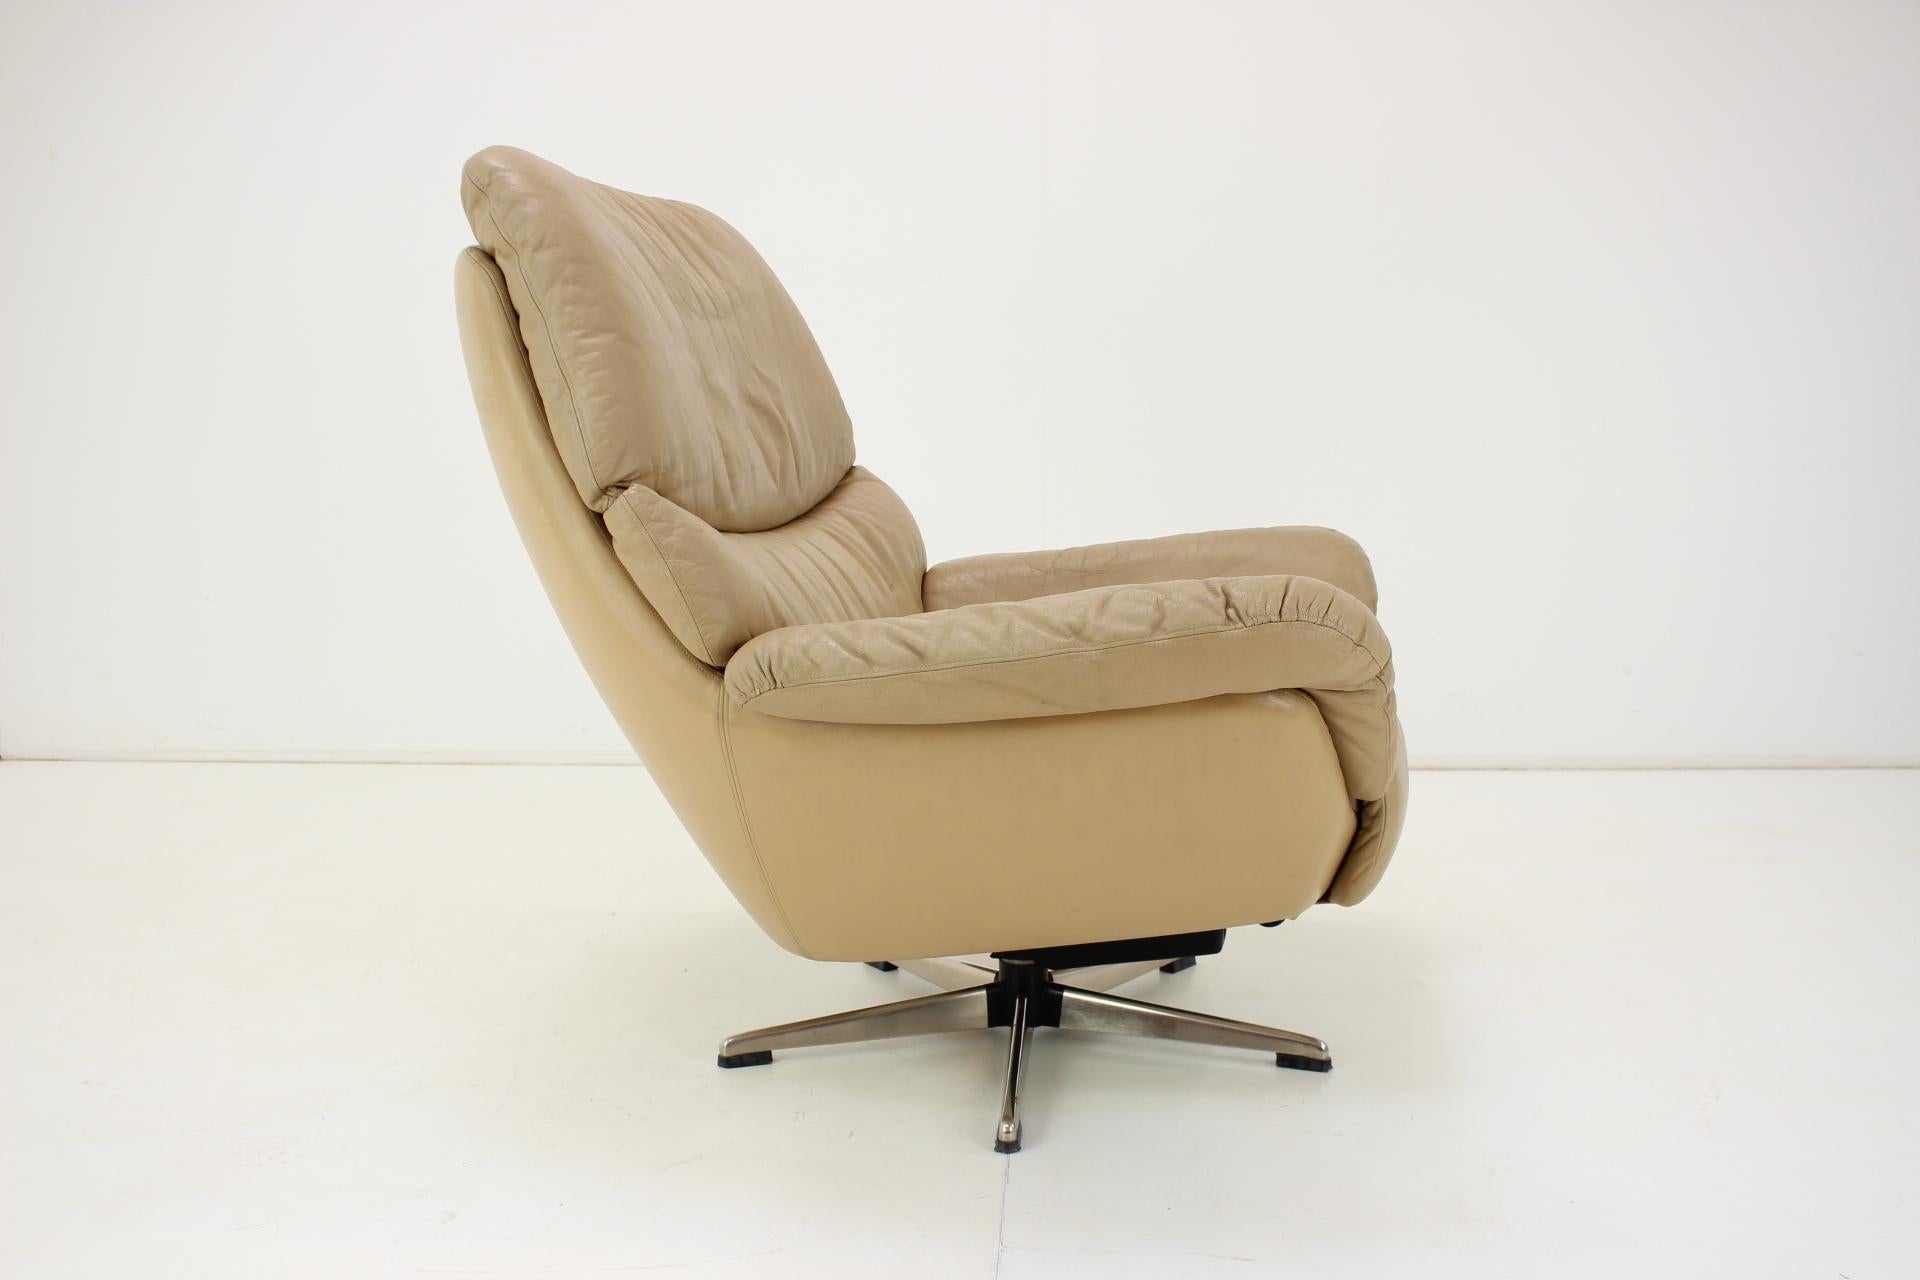 Large Scandinavian Adjustable Leather Armchair by Peem, 1970s, Finland For Sale 3